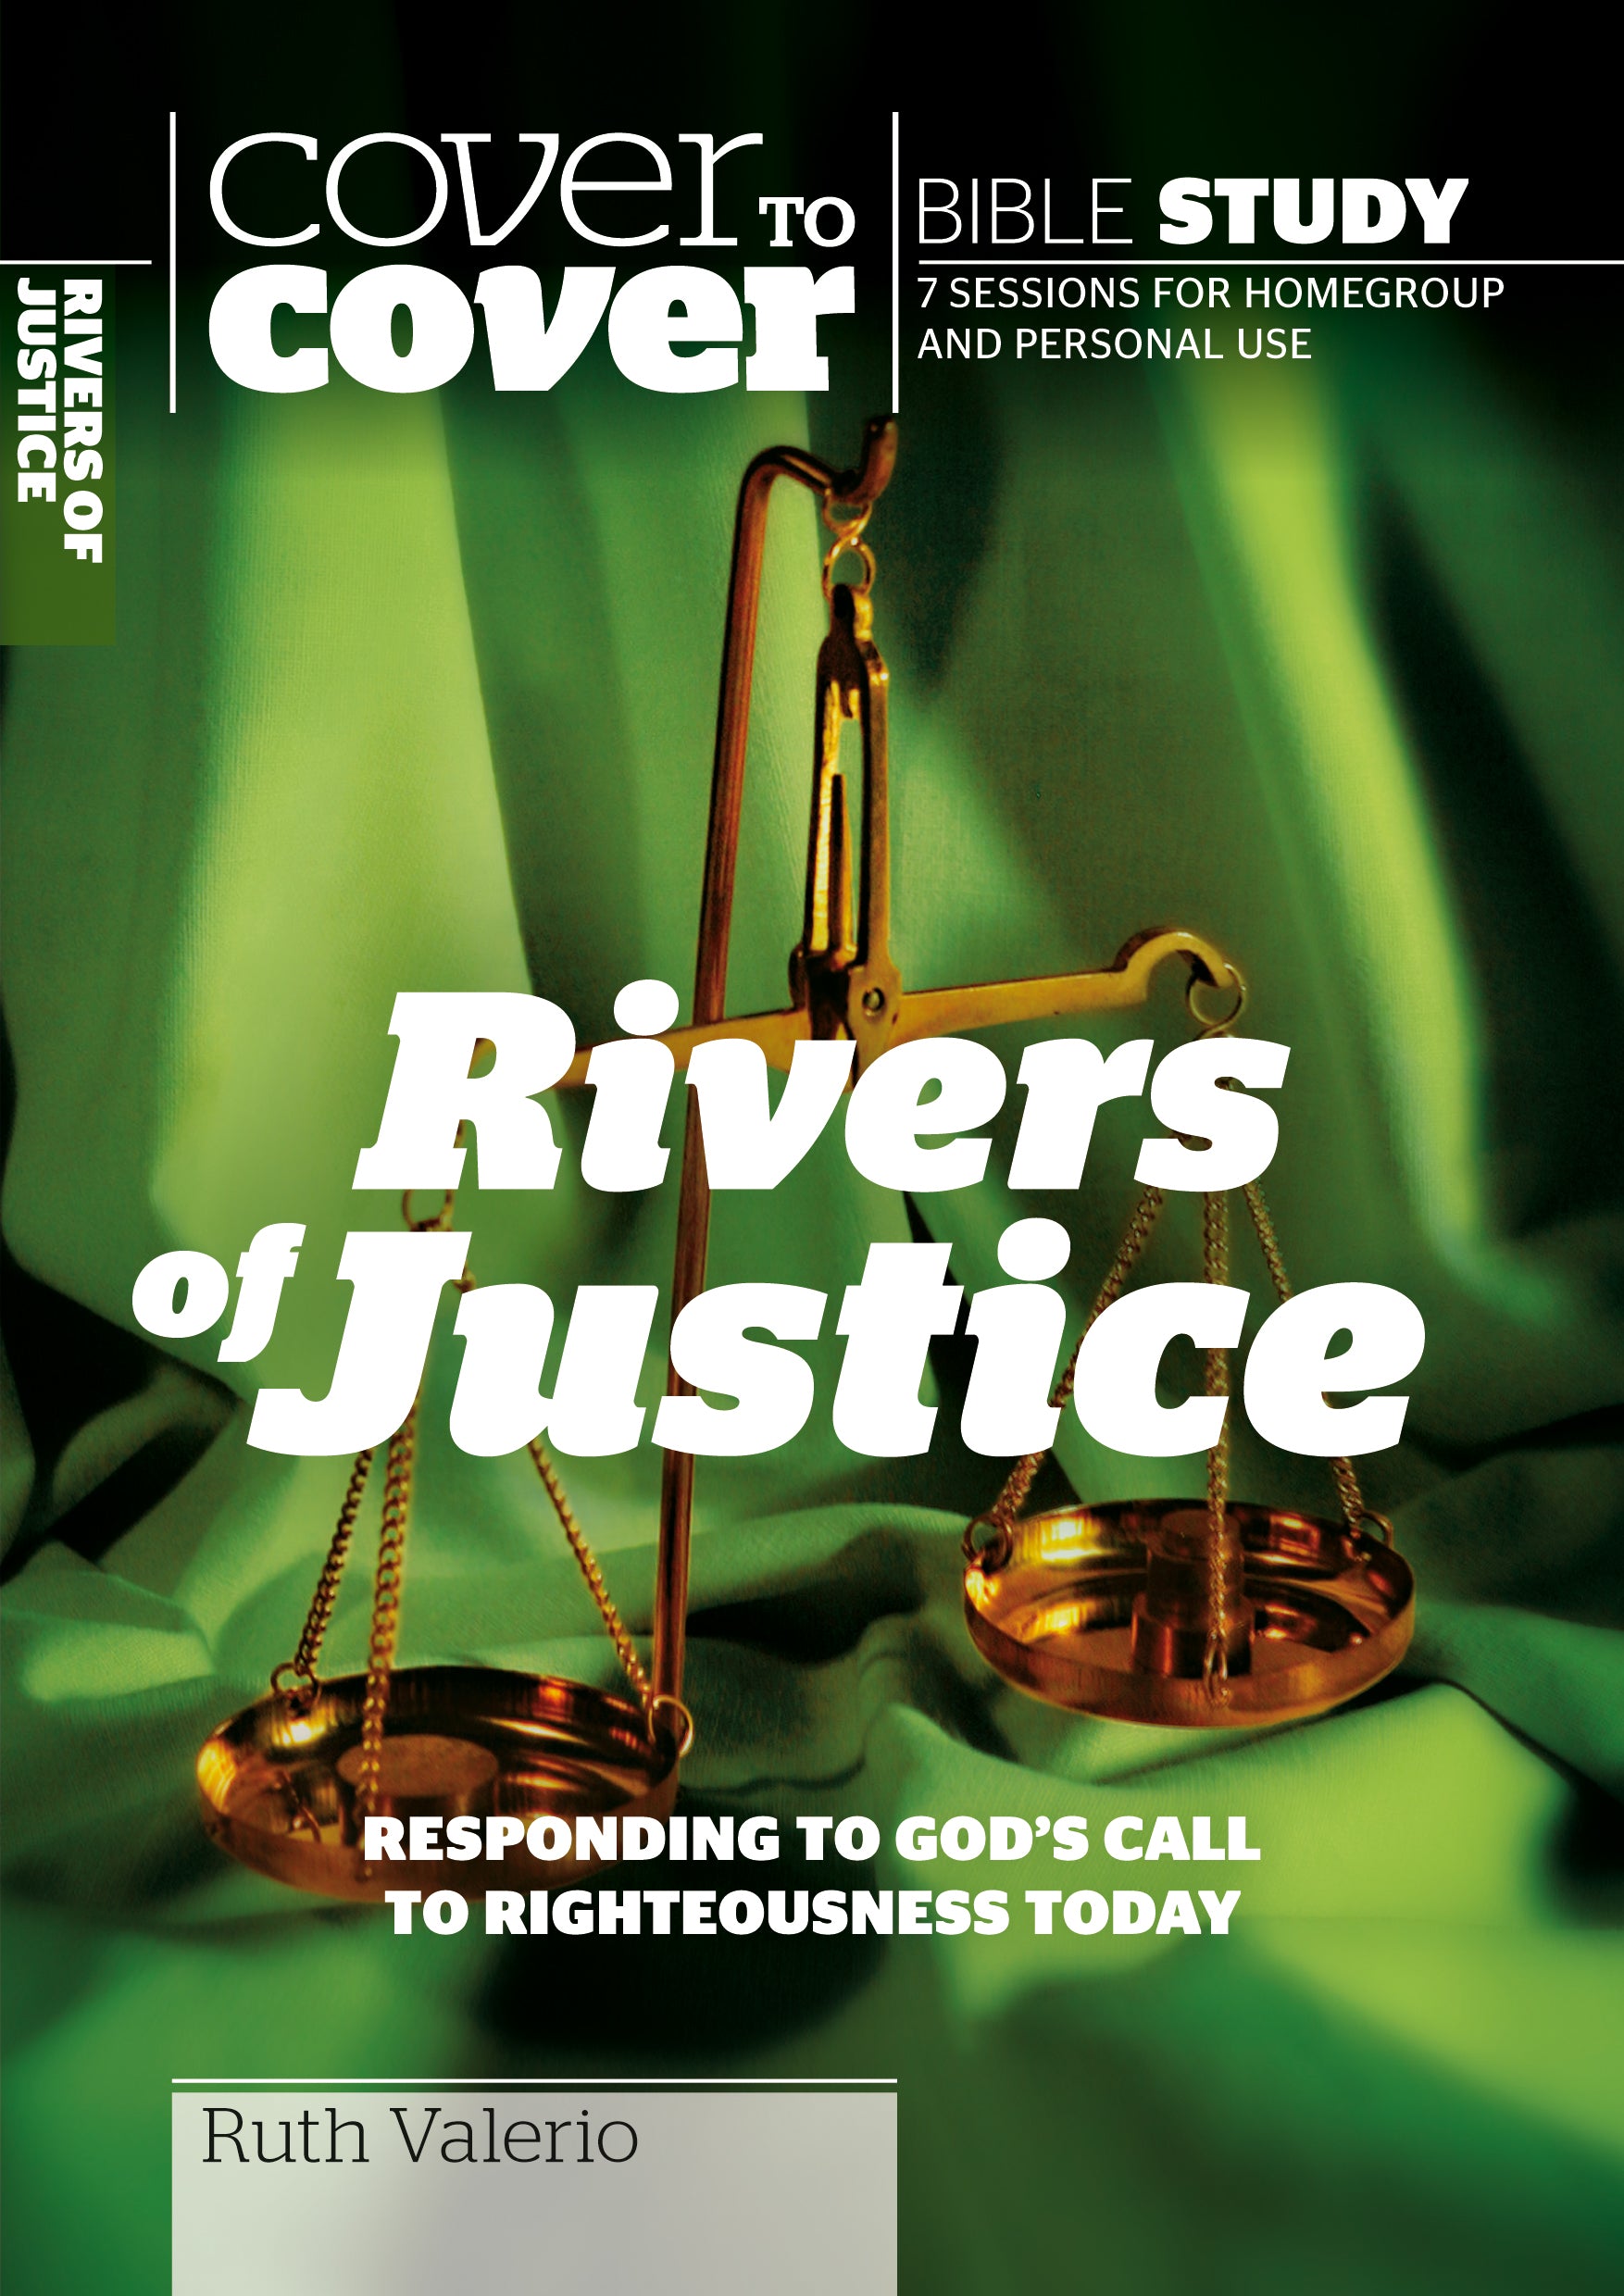 Image of Rivers of Justice other